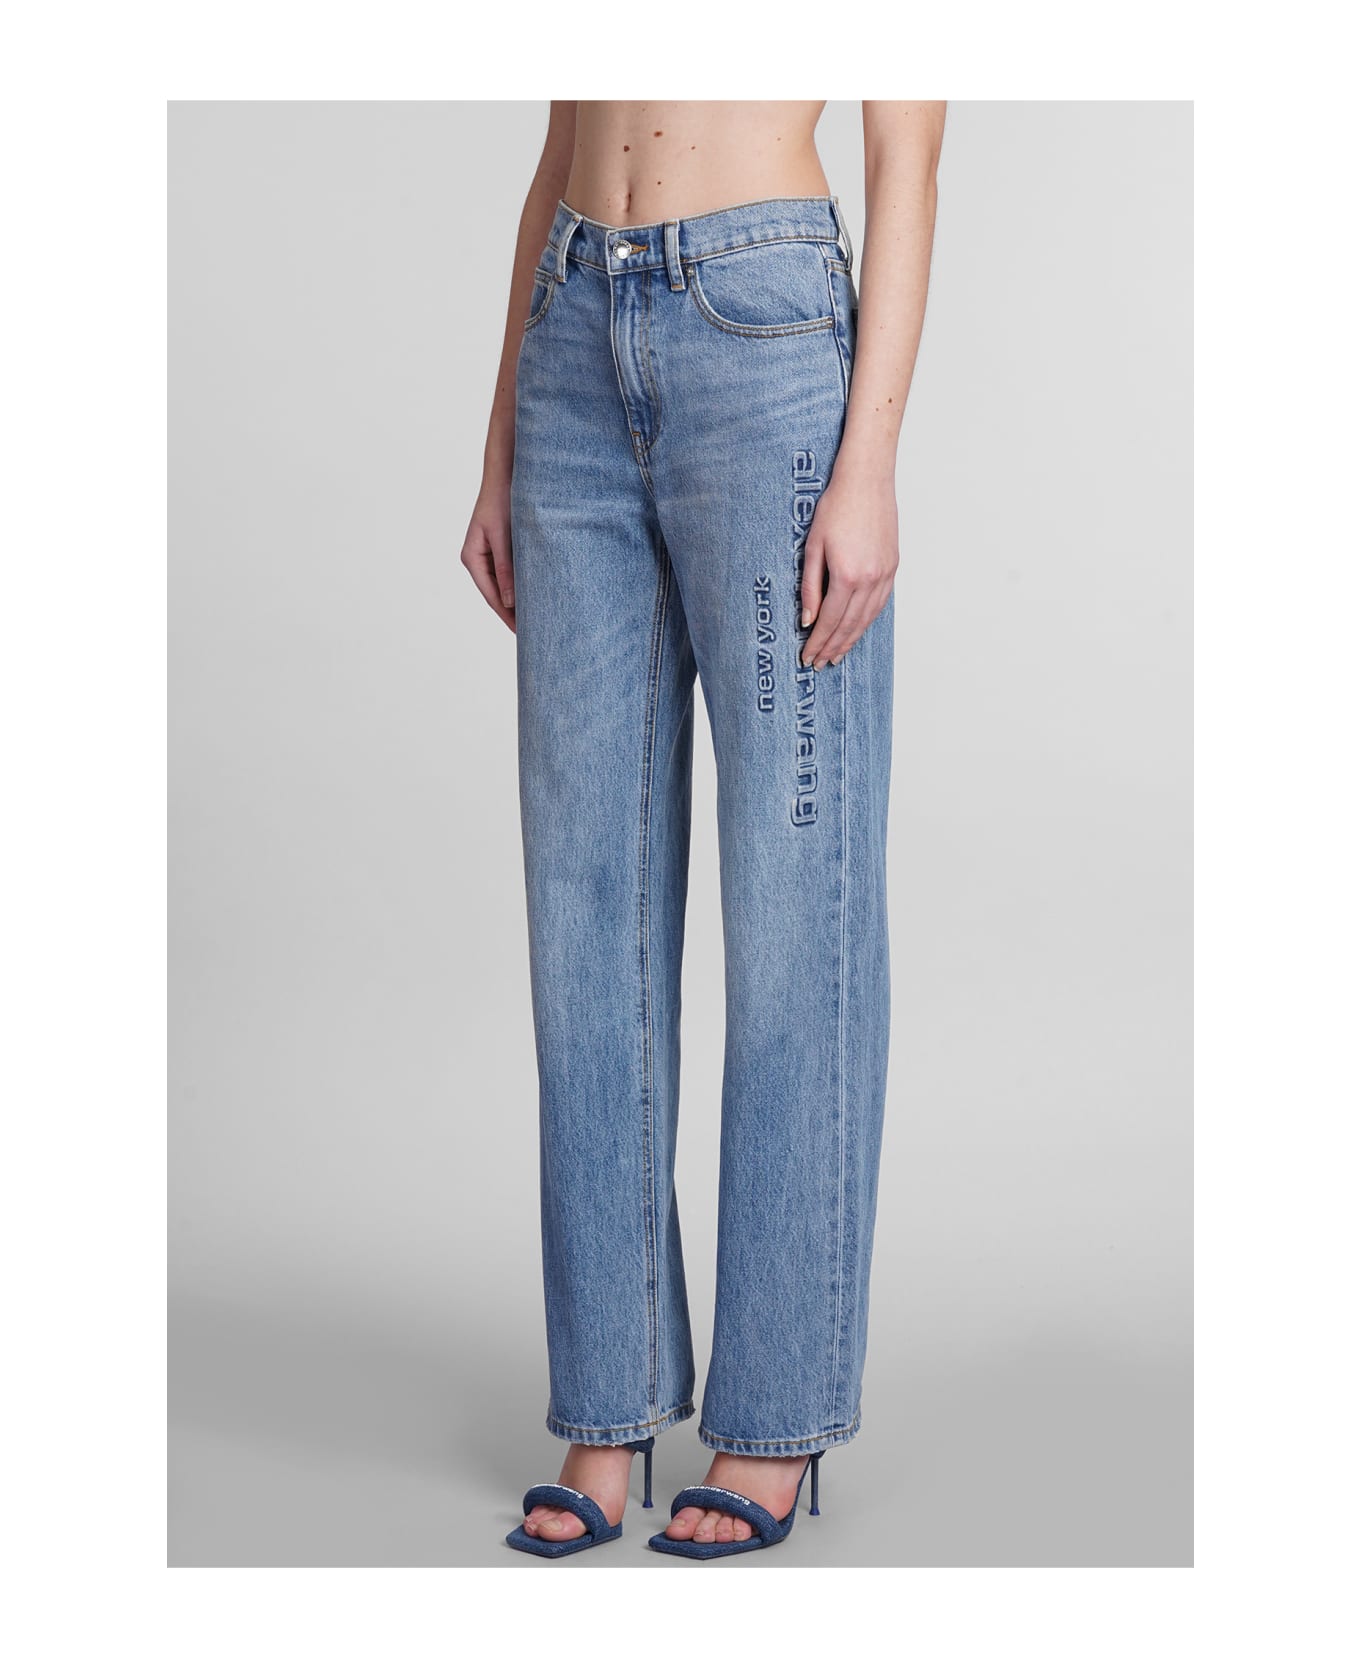 Alexander Wang Jeans In Blue Cotton - blue デニム